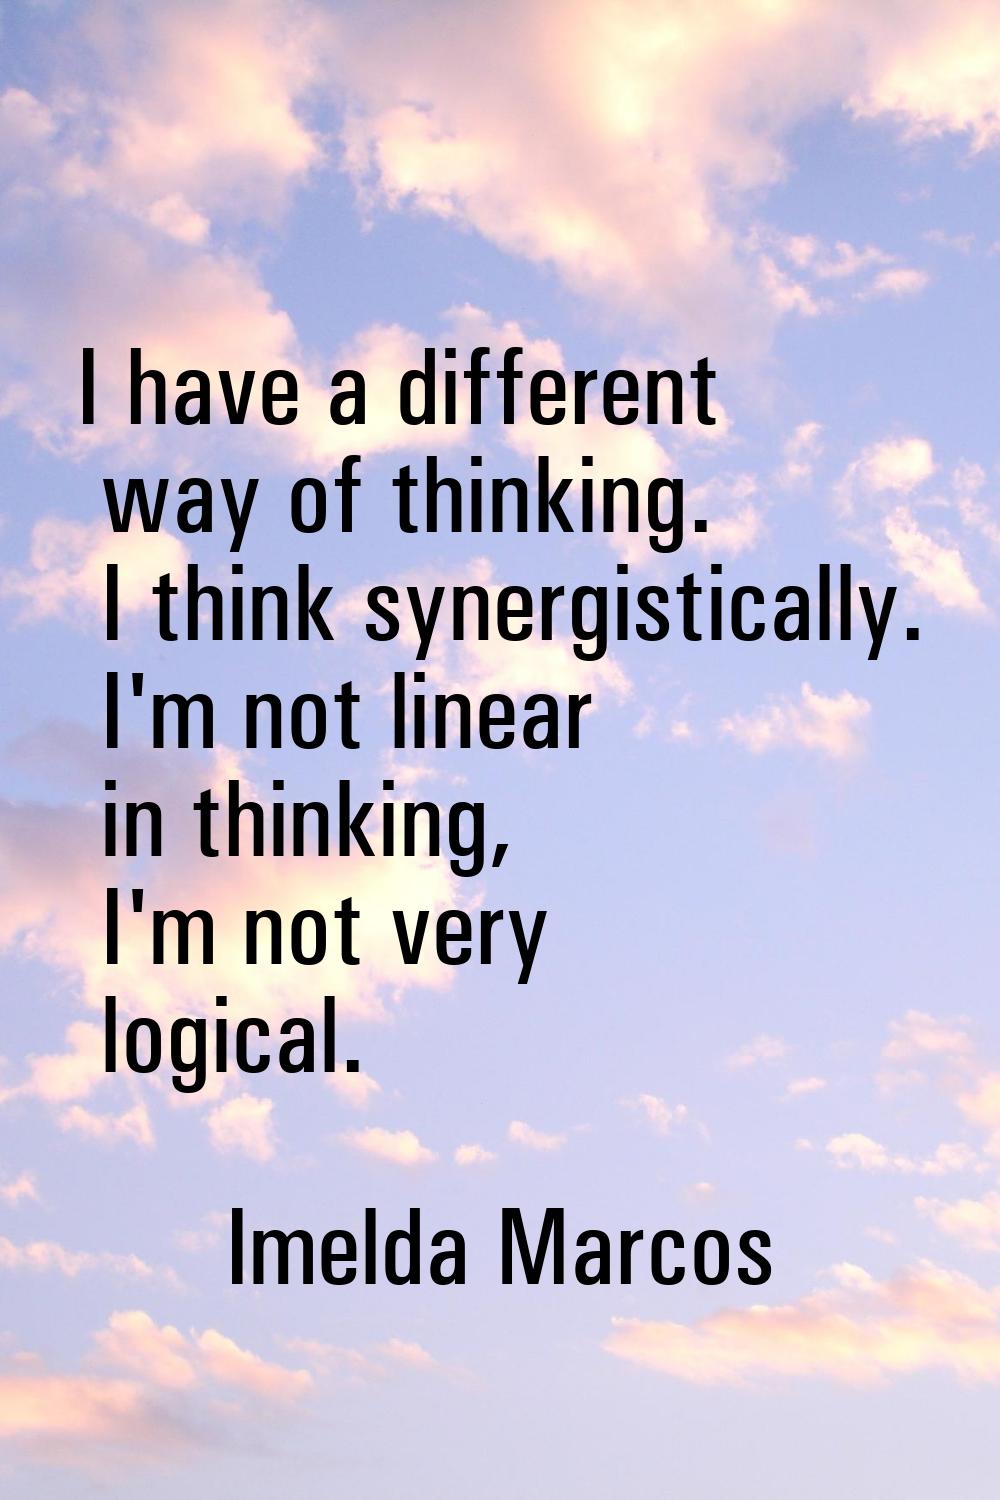 I have a different way of thinking. I think synergistically. I'm not linear in thinking, I'm not ve